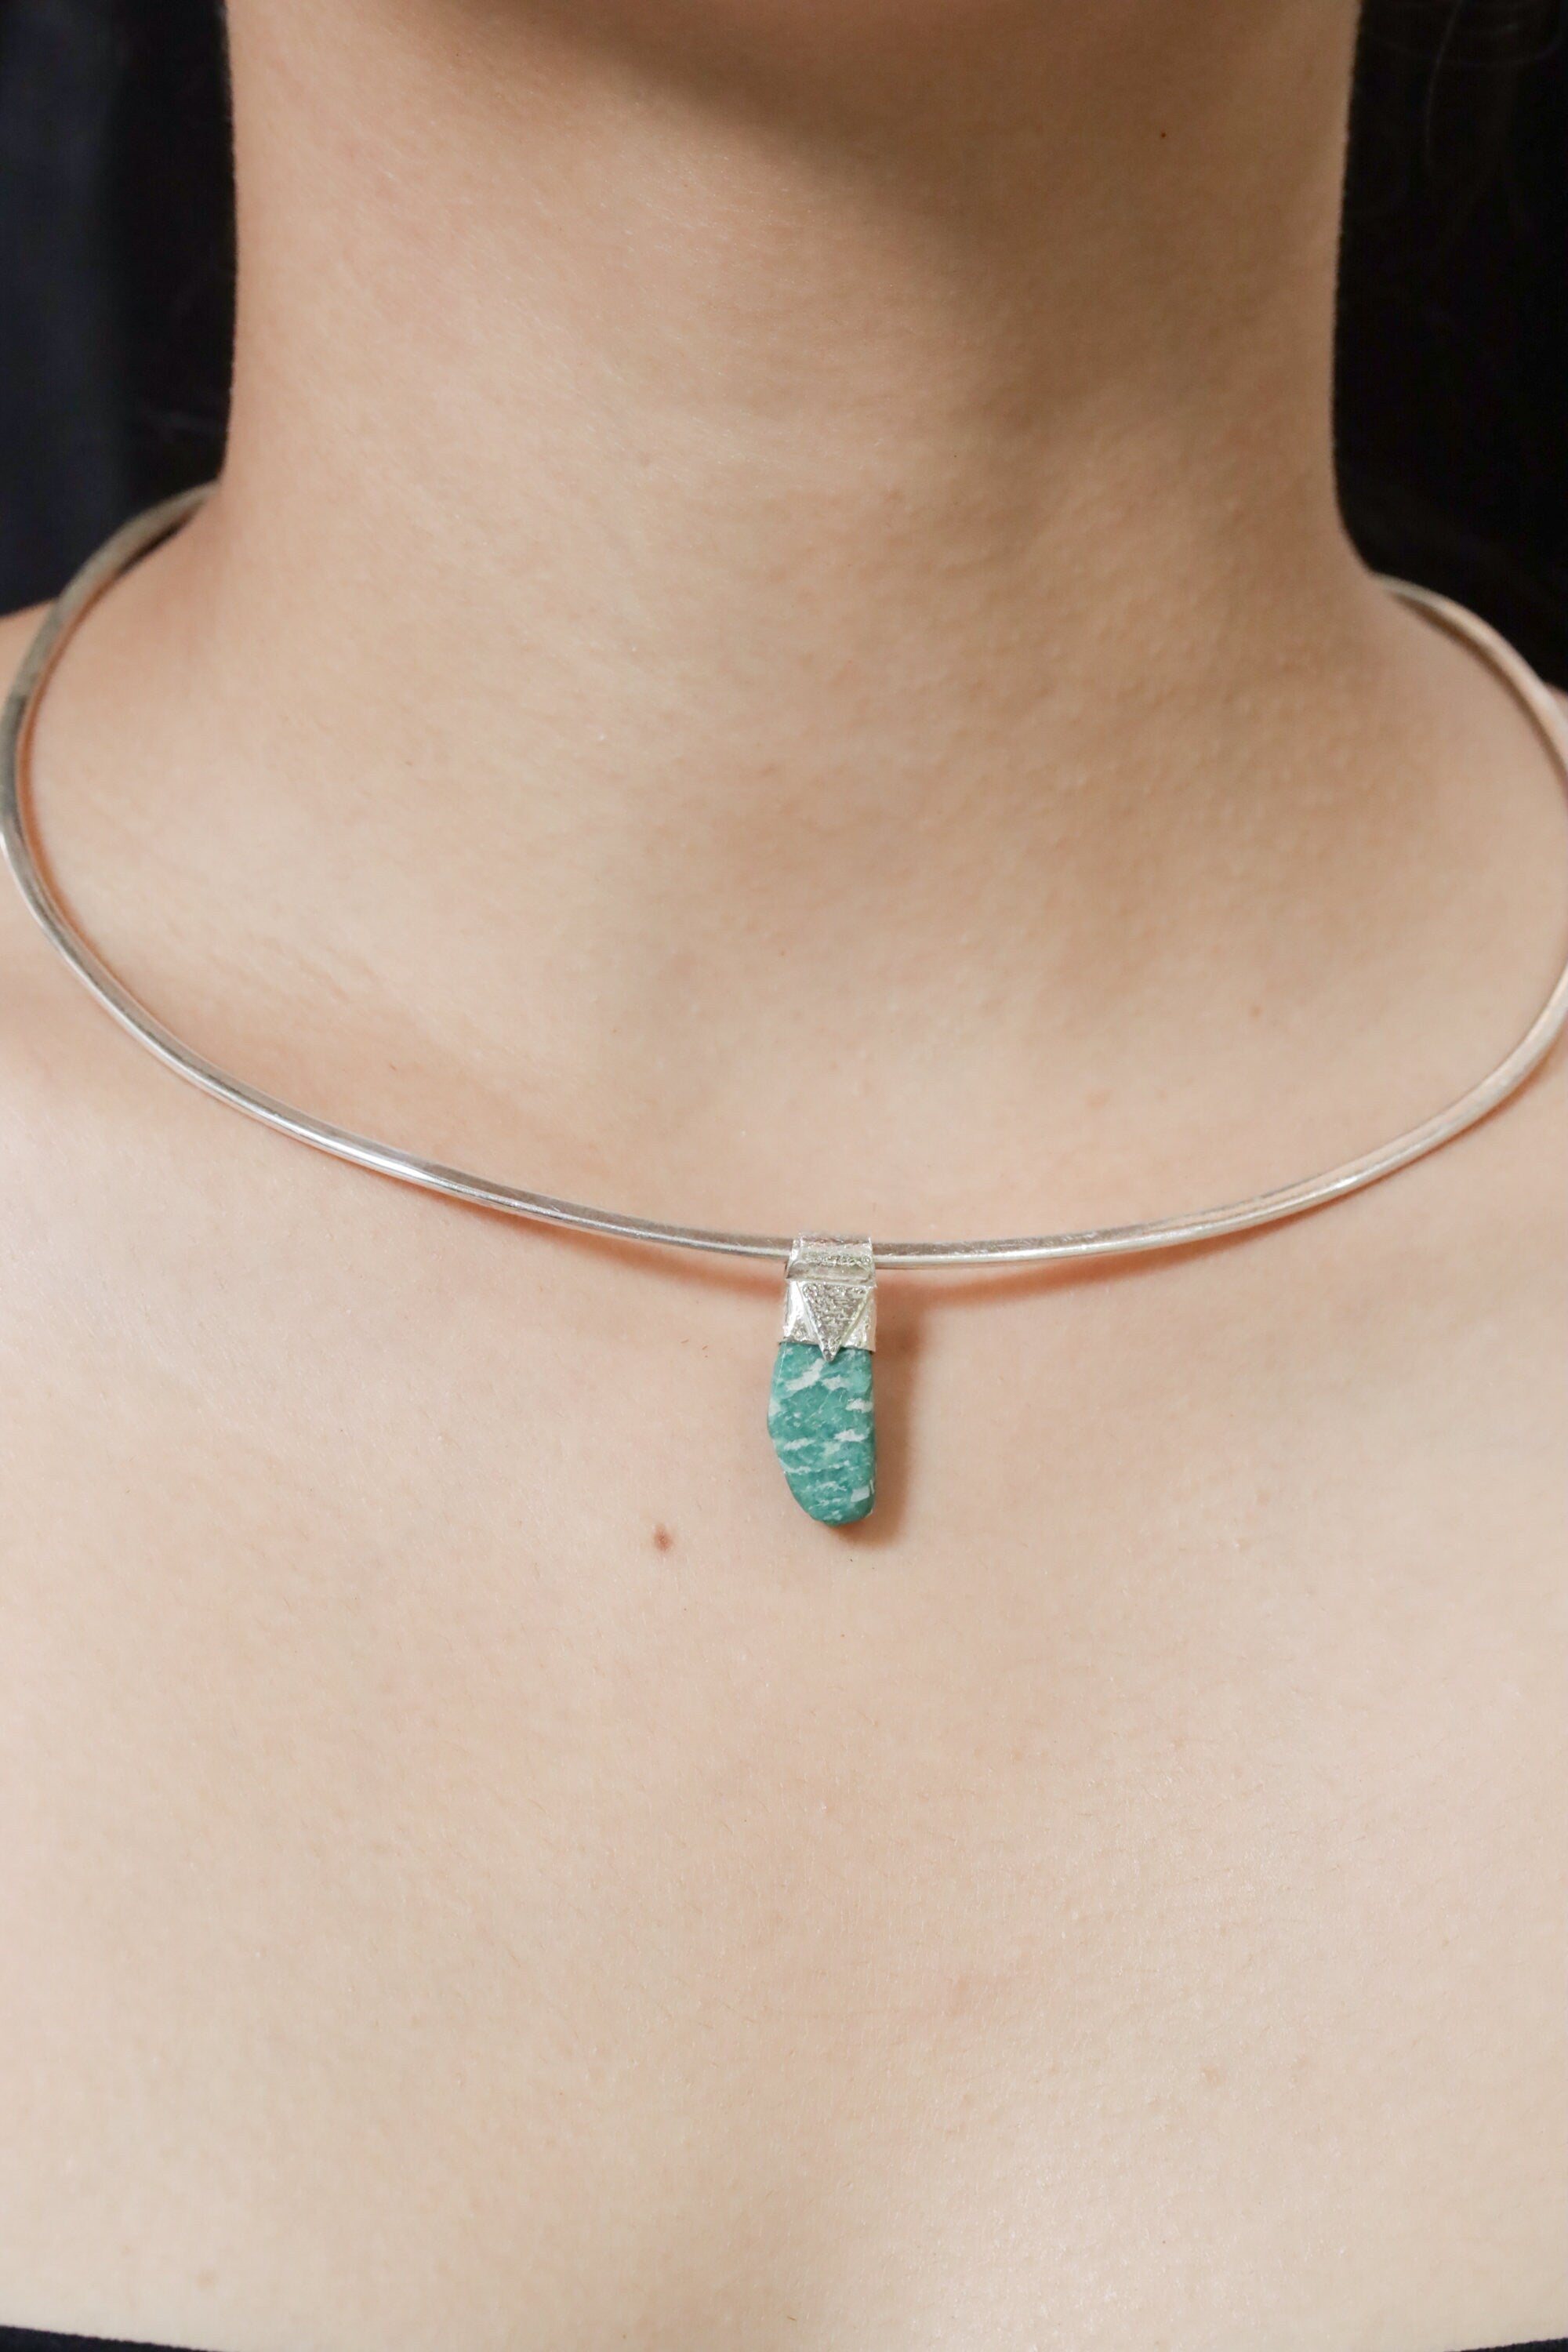 Rough Cut Amazonite - Stack Pendant - Organic Textured 925 Sterling Silver - Crystal Necklace - No/2